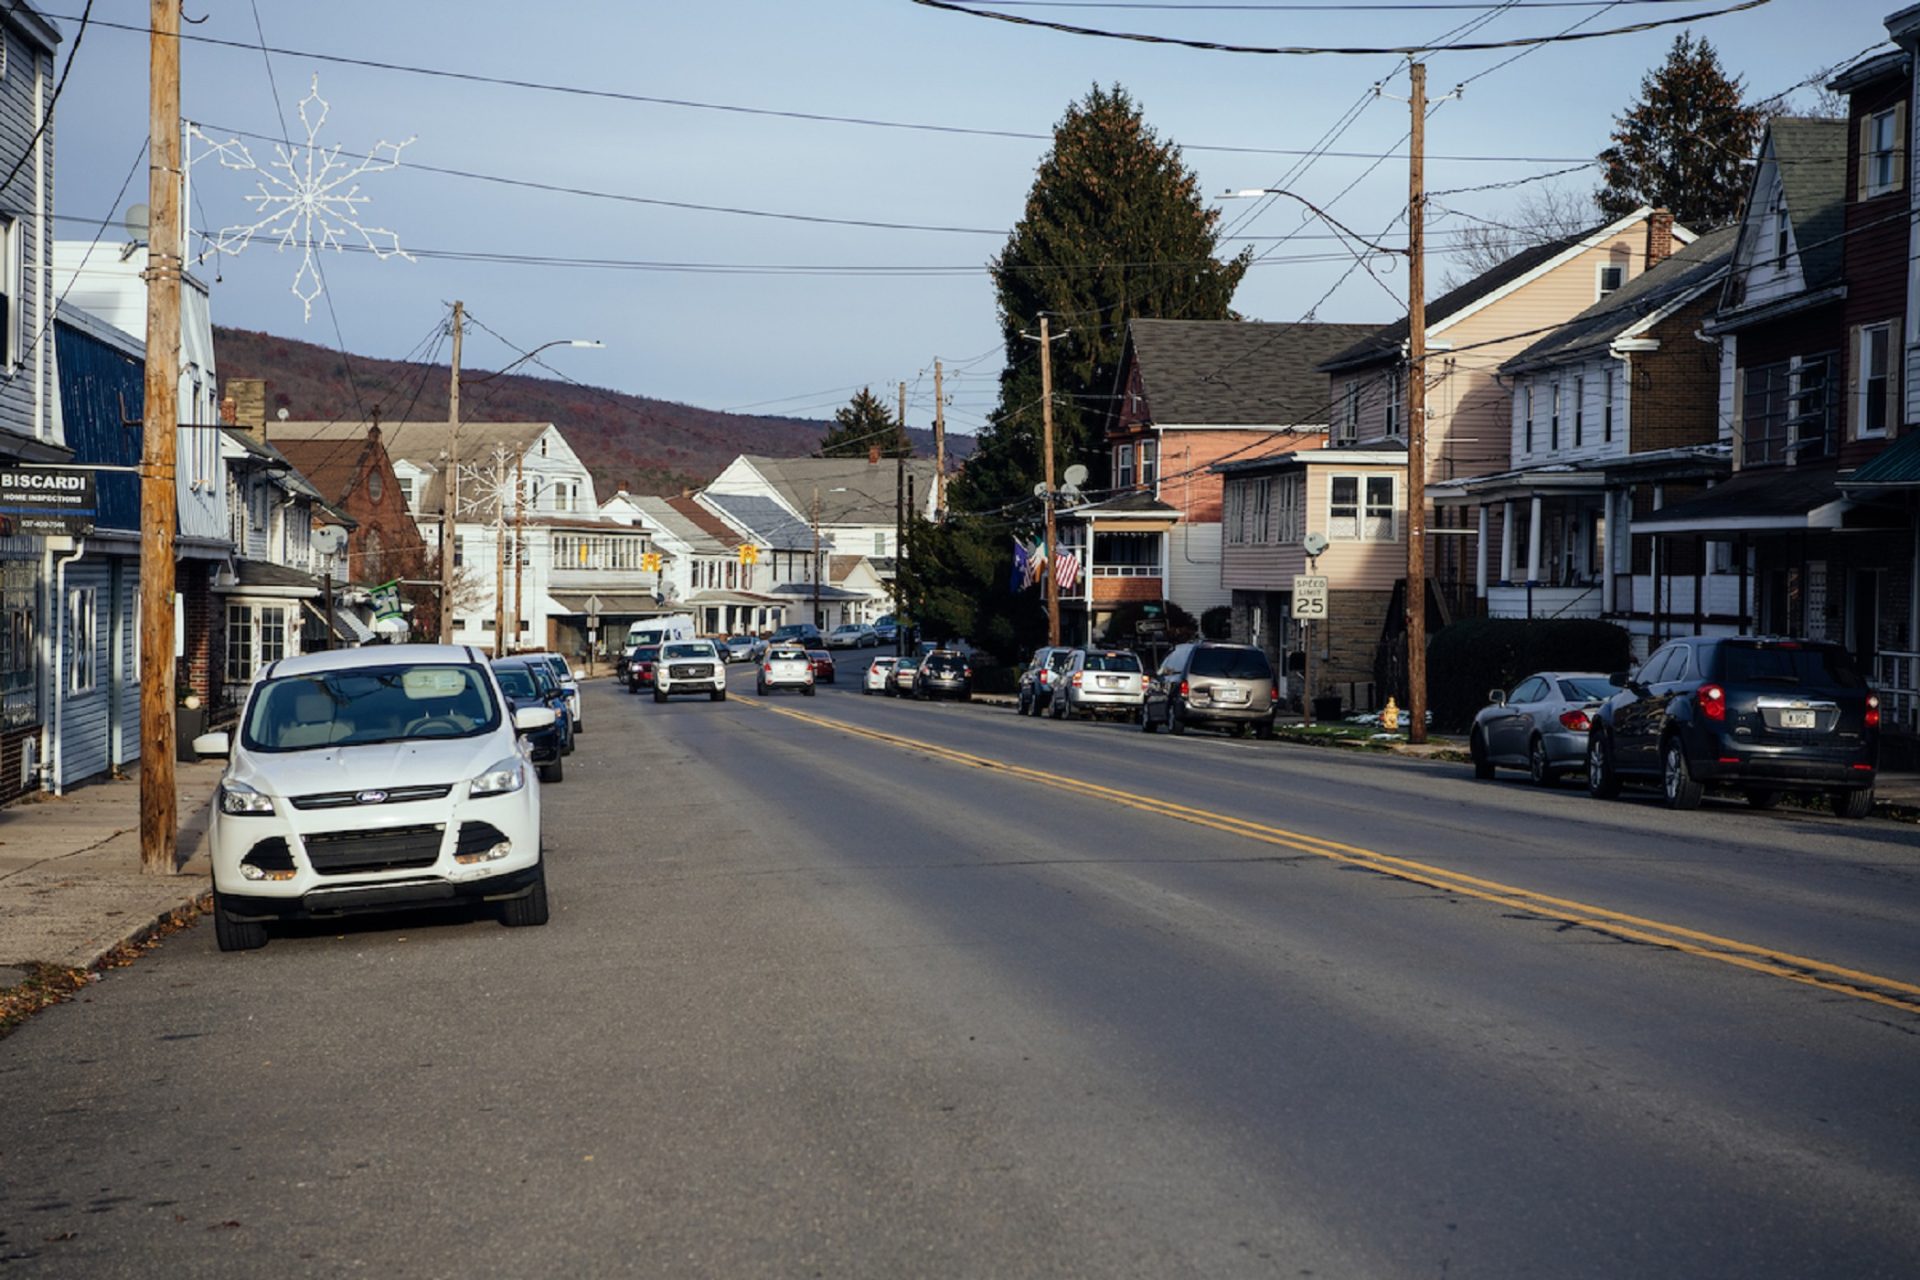 The main street through Nesquehoning, Route 209, loops up through the mountain to Lansford, Summit Hill, and Coaldale. The four towns make up the Panther Valley School District. PTO President Amber Zuber described the area as having ”coal region culture.”